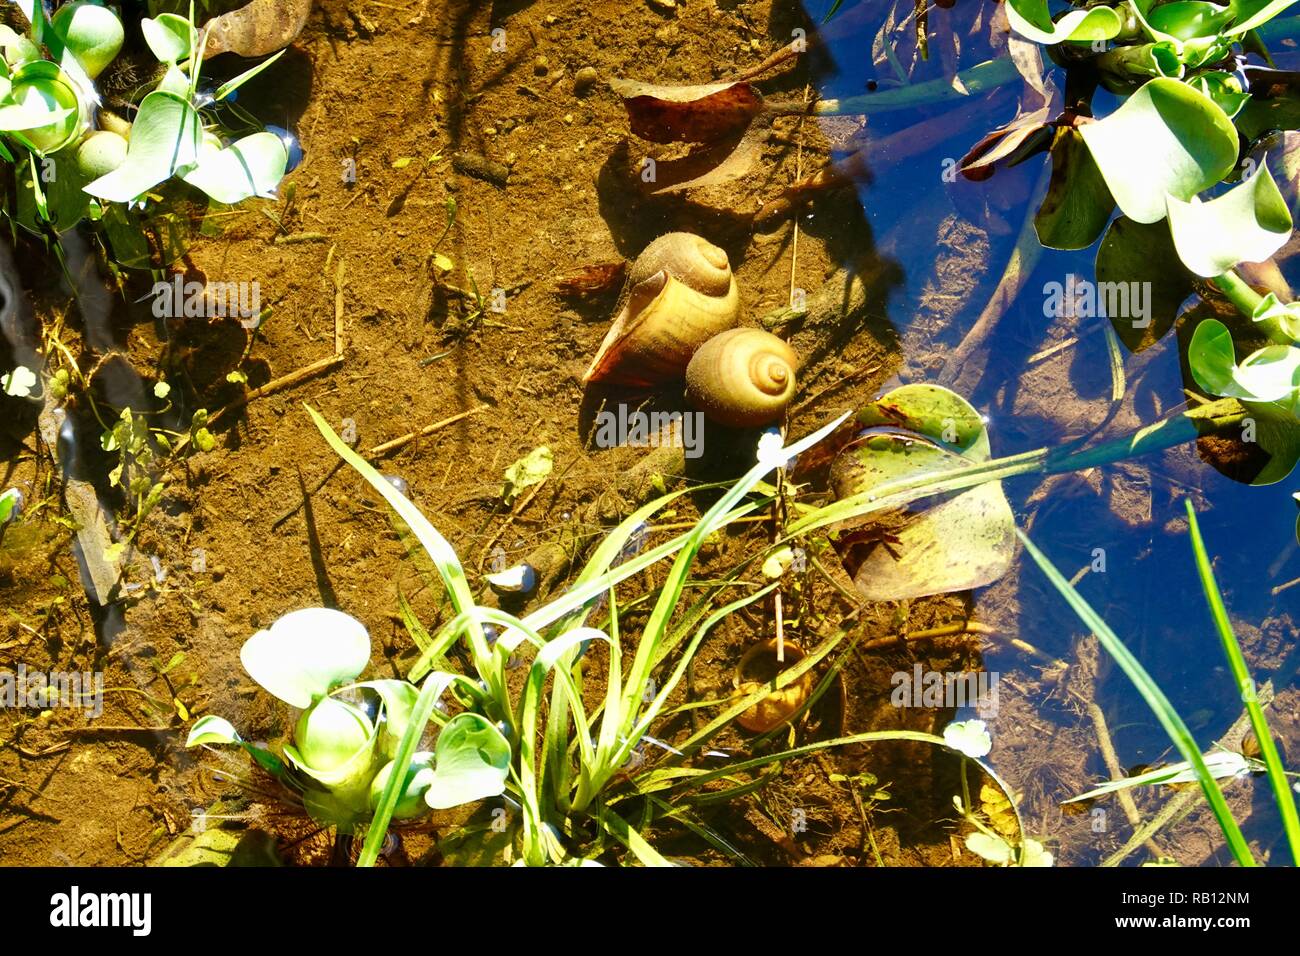 Close-up of two apple snail shells, Ampullariidae, submerged in a fresh water lake. North Florida, USA. Stock Photo